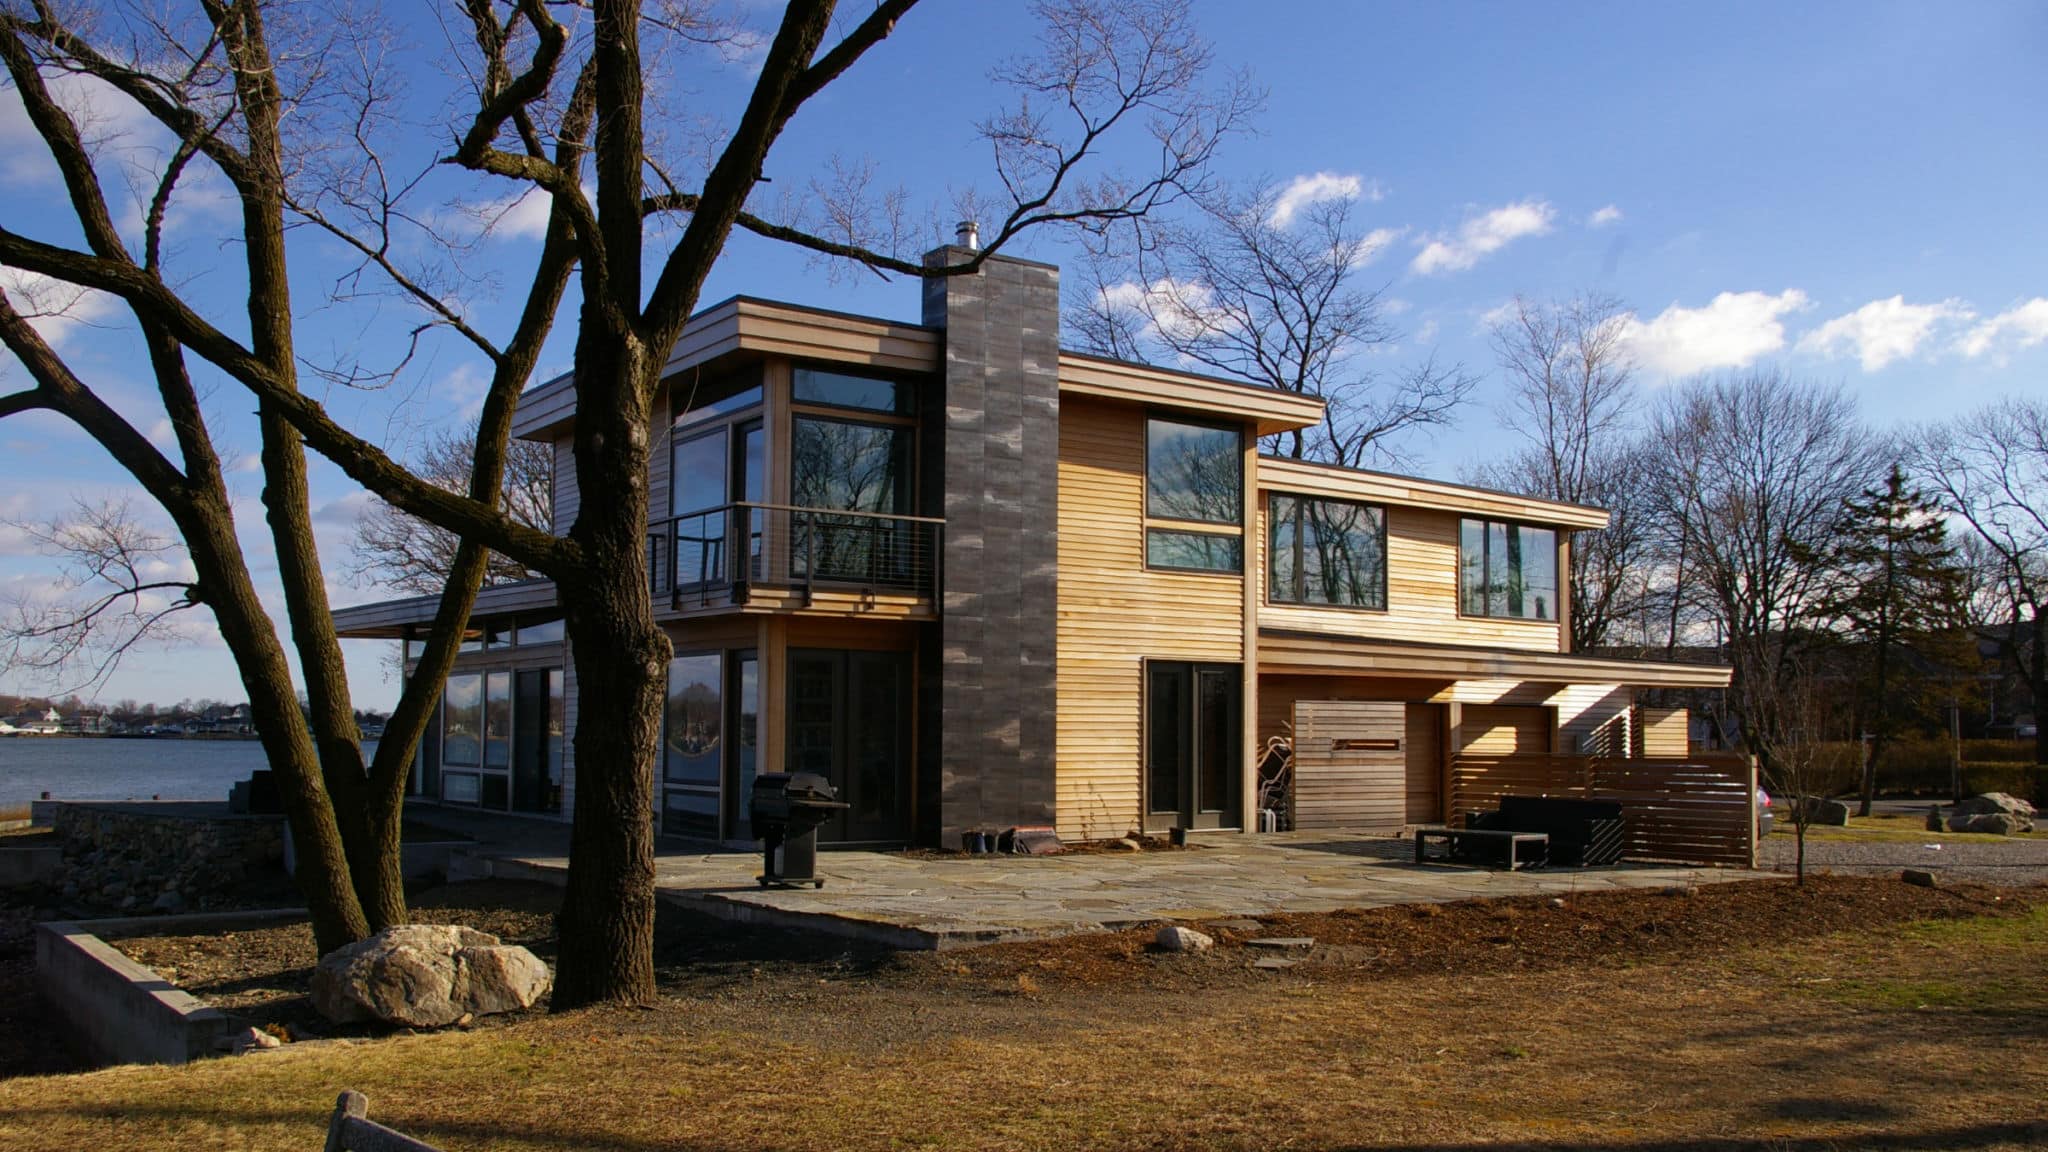 LEED Platinum Certified green Home in CT on LI Sound